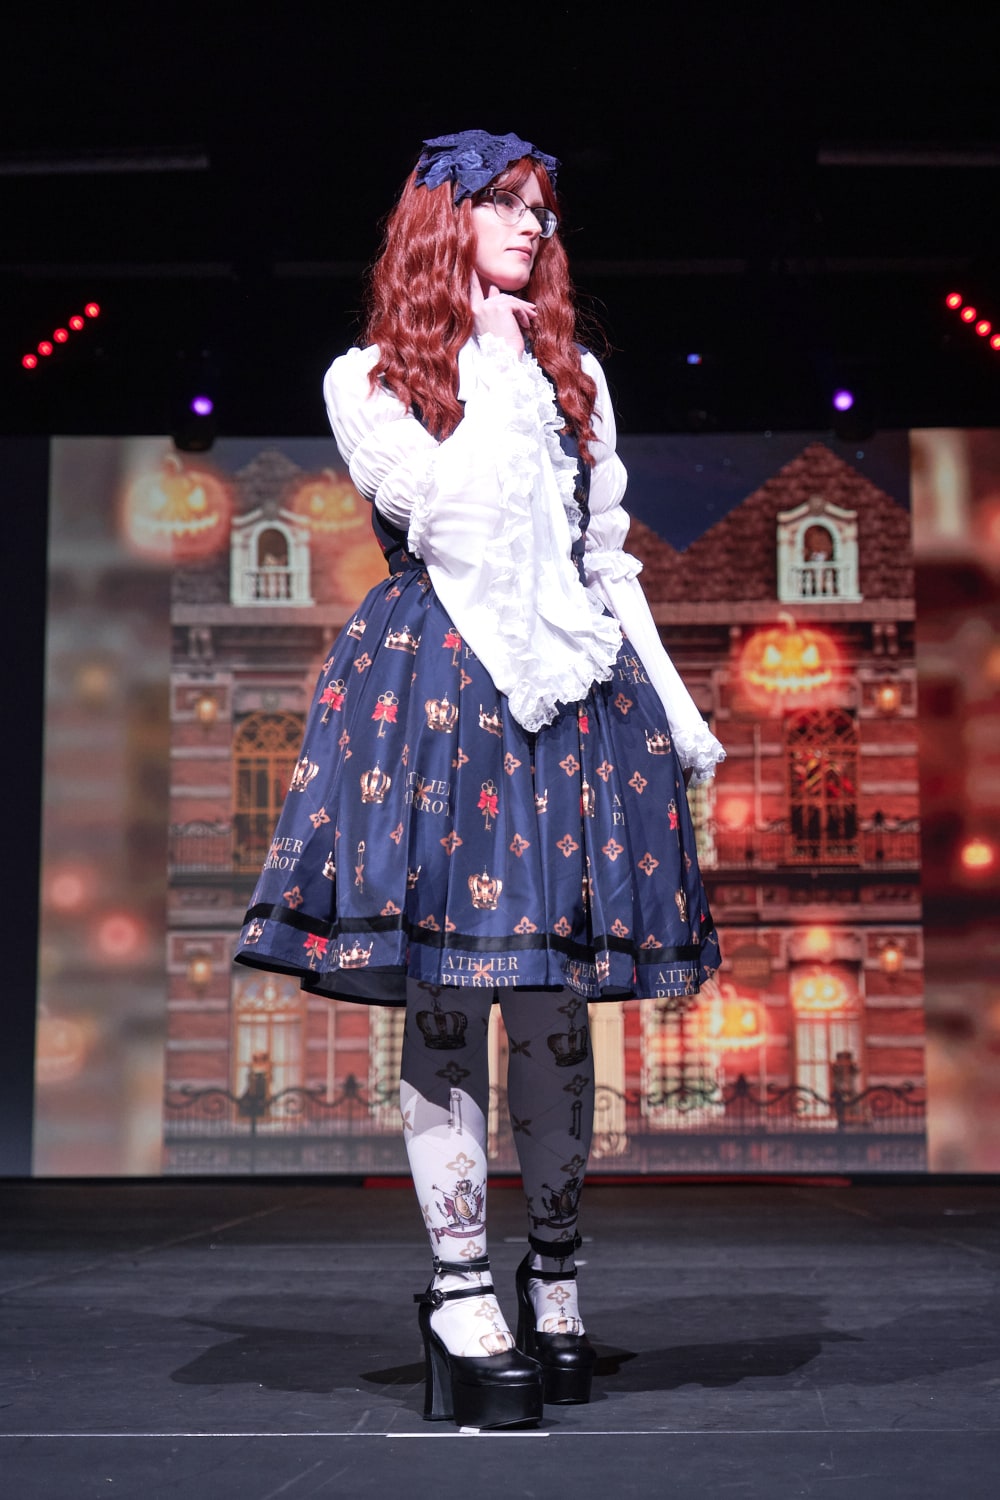 Atelier Pierrot classic lolita model wearing white princess sleeve blouse with crown print vest-style jumperskirt and matching crown tights - full body standing pose 3.